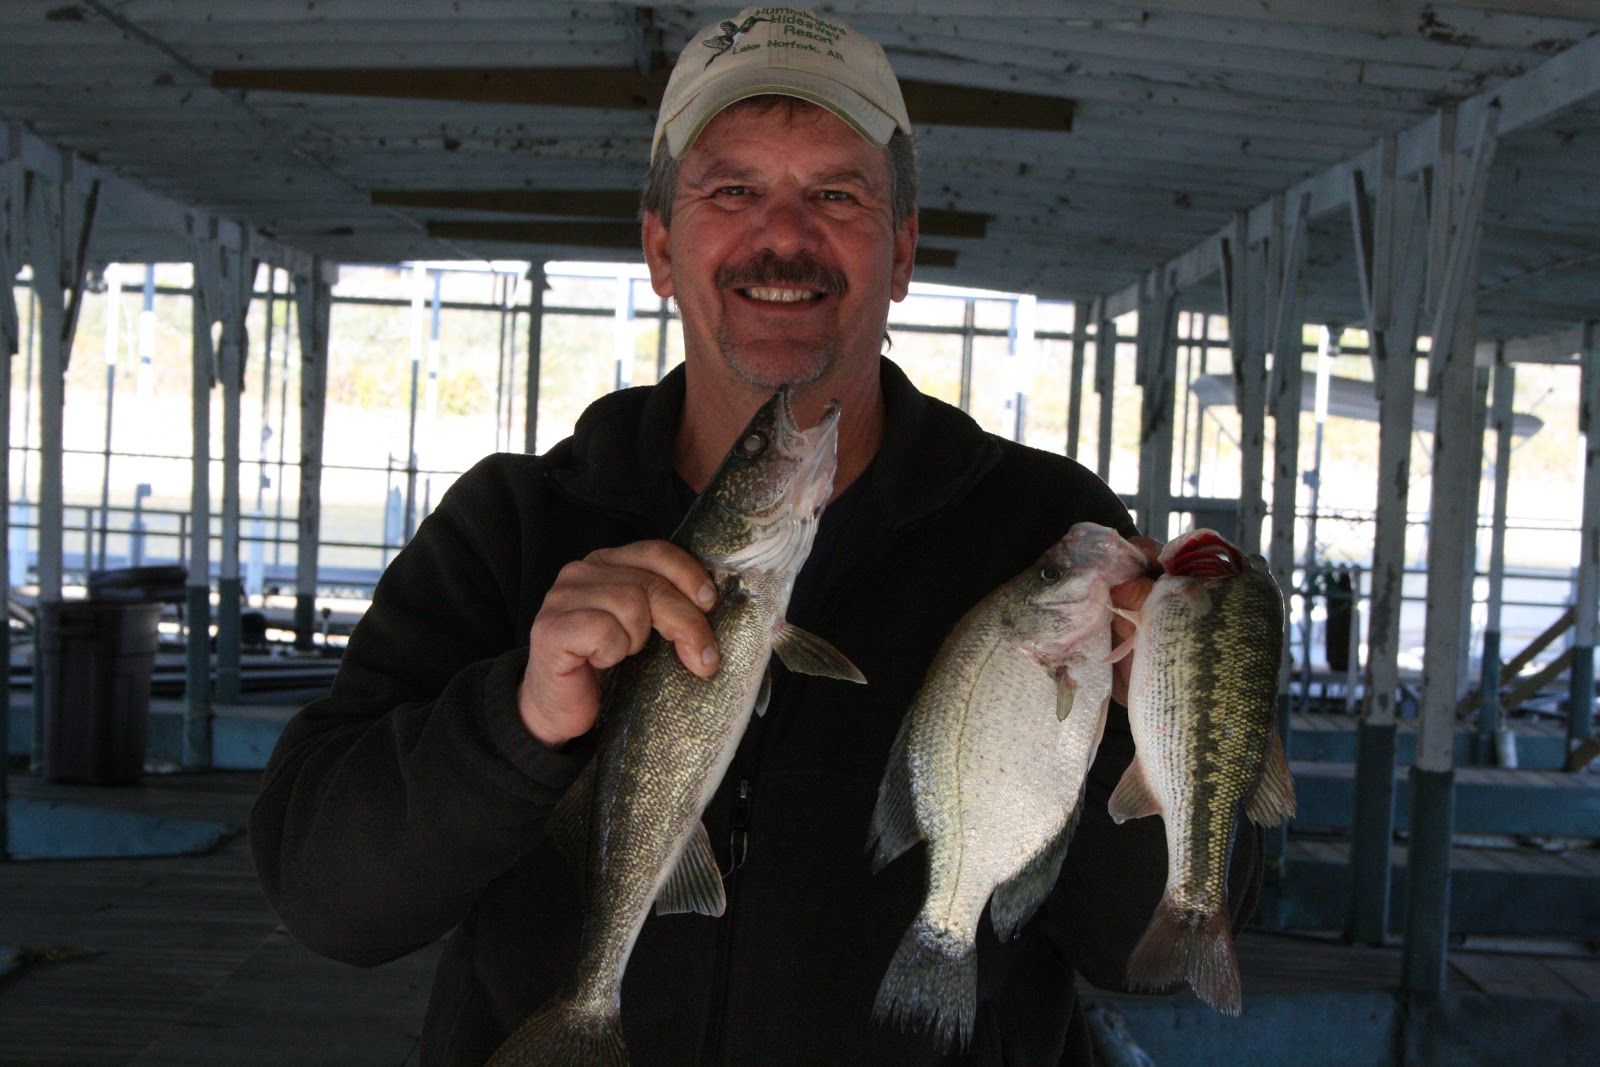 Lake of the ozarks fishing report november 2012 emails